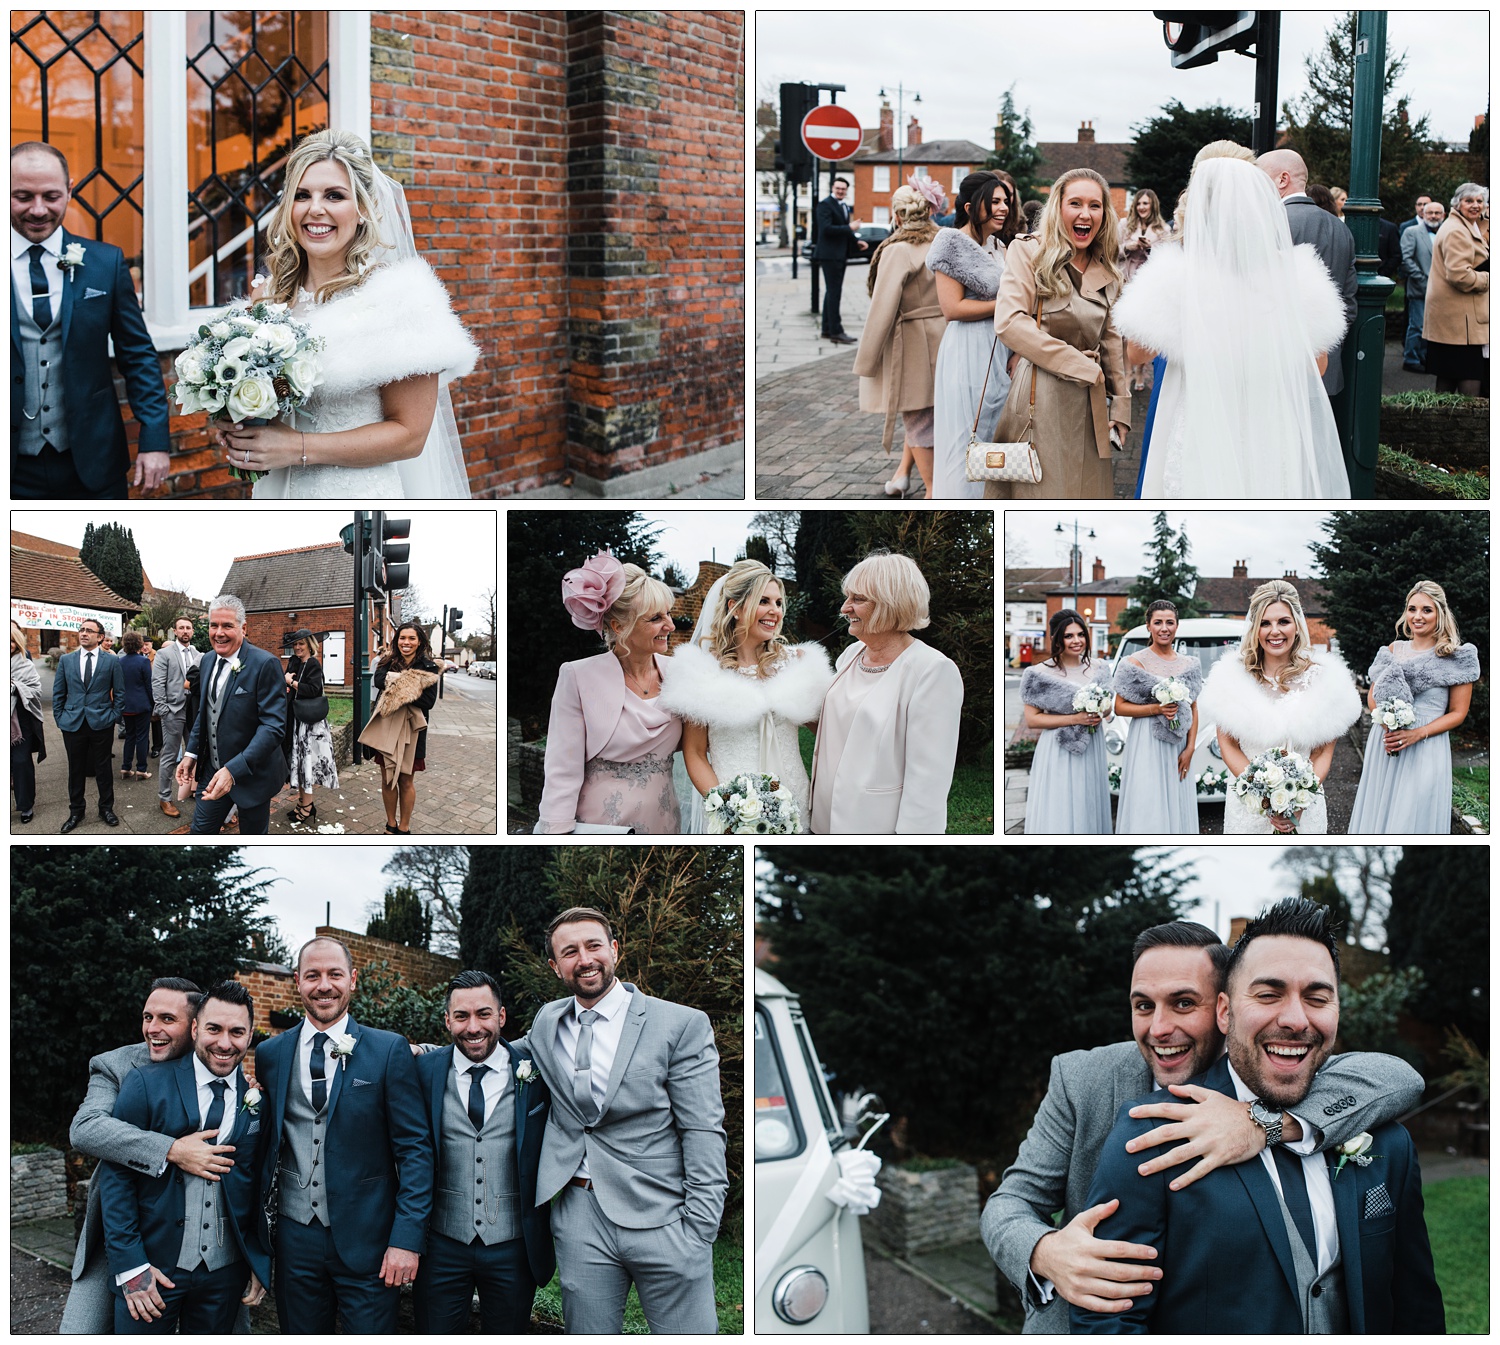 Some casual group wedding photographs on Hockley Road in Rayleigh.